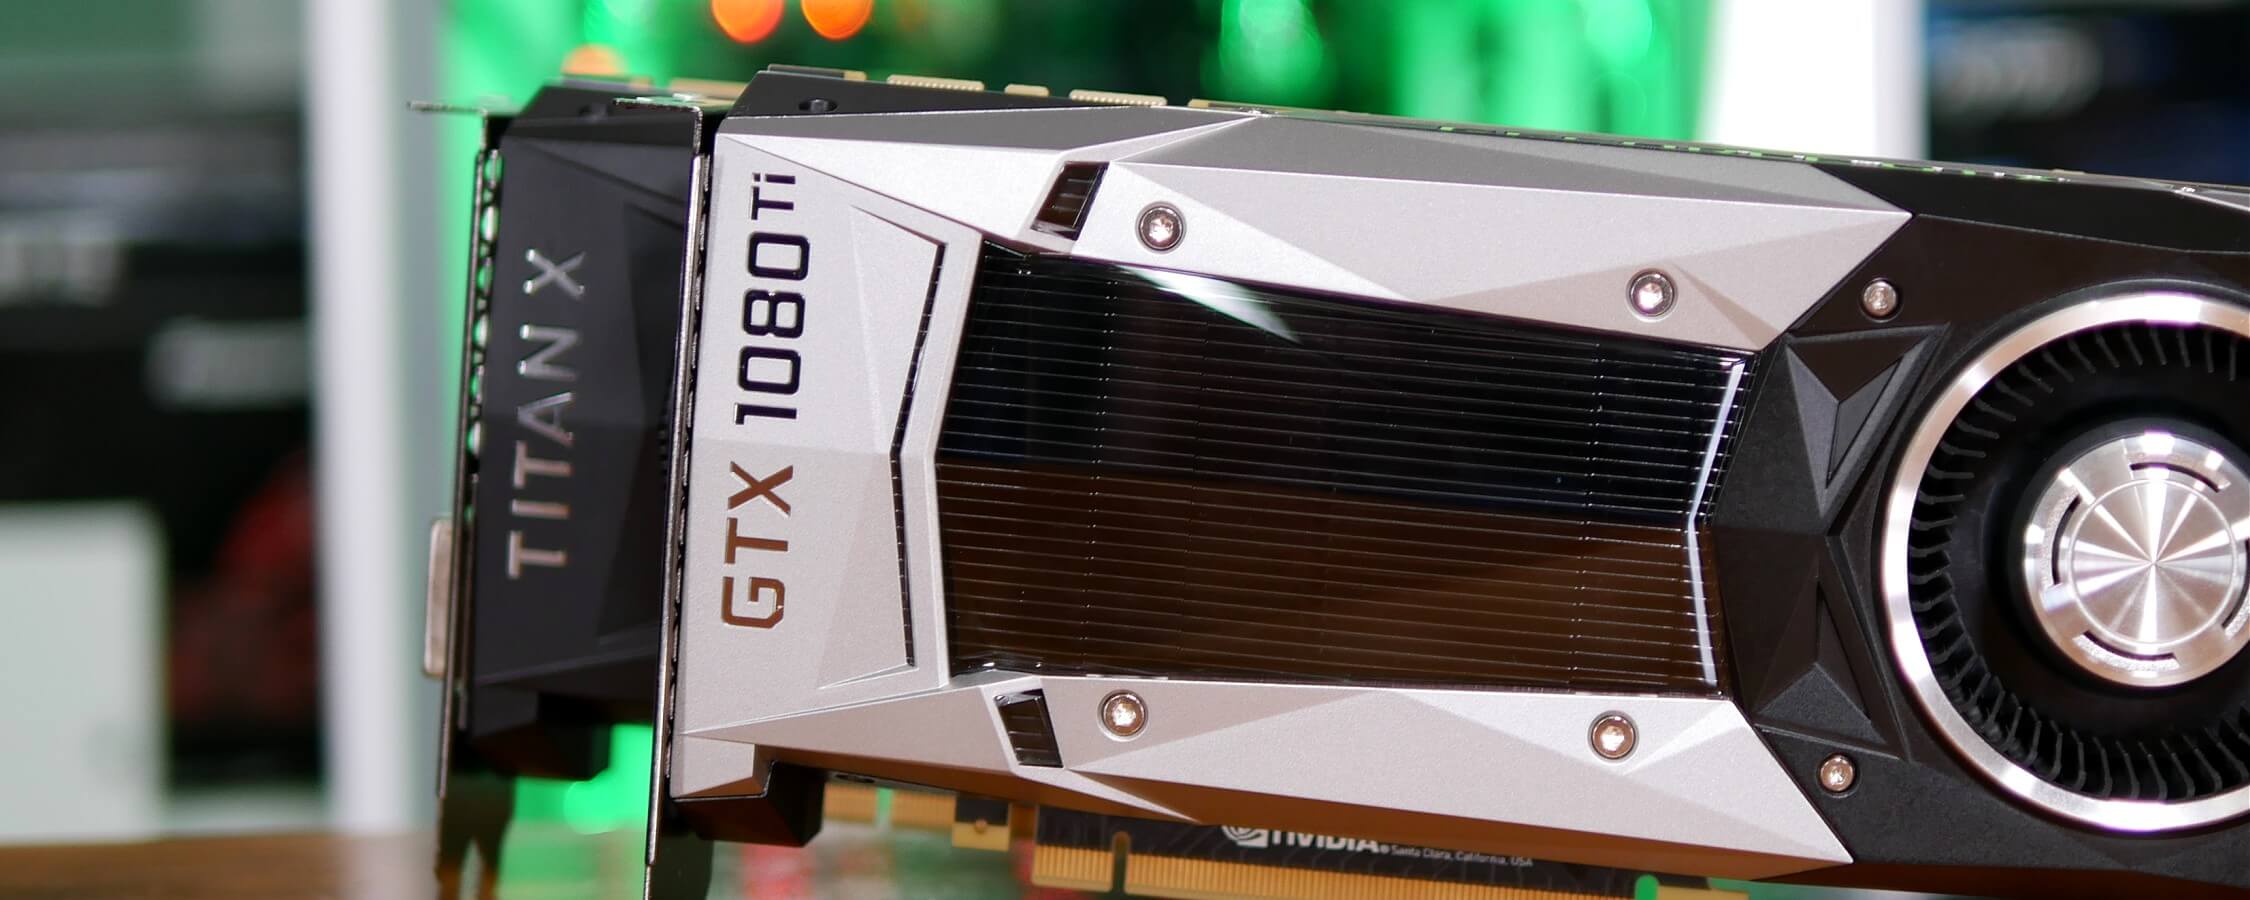 Nvidia is dropping support for 32-bit operating systems